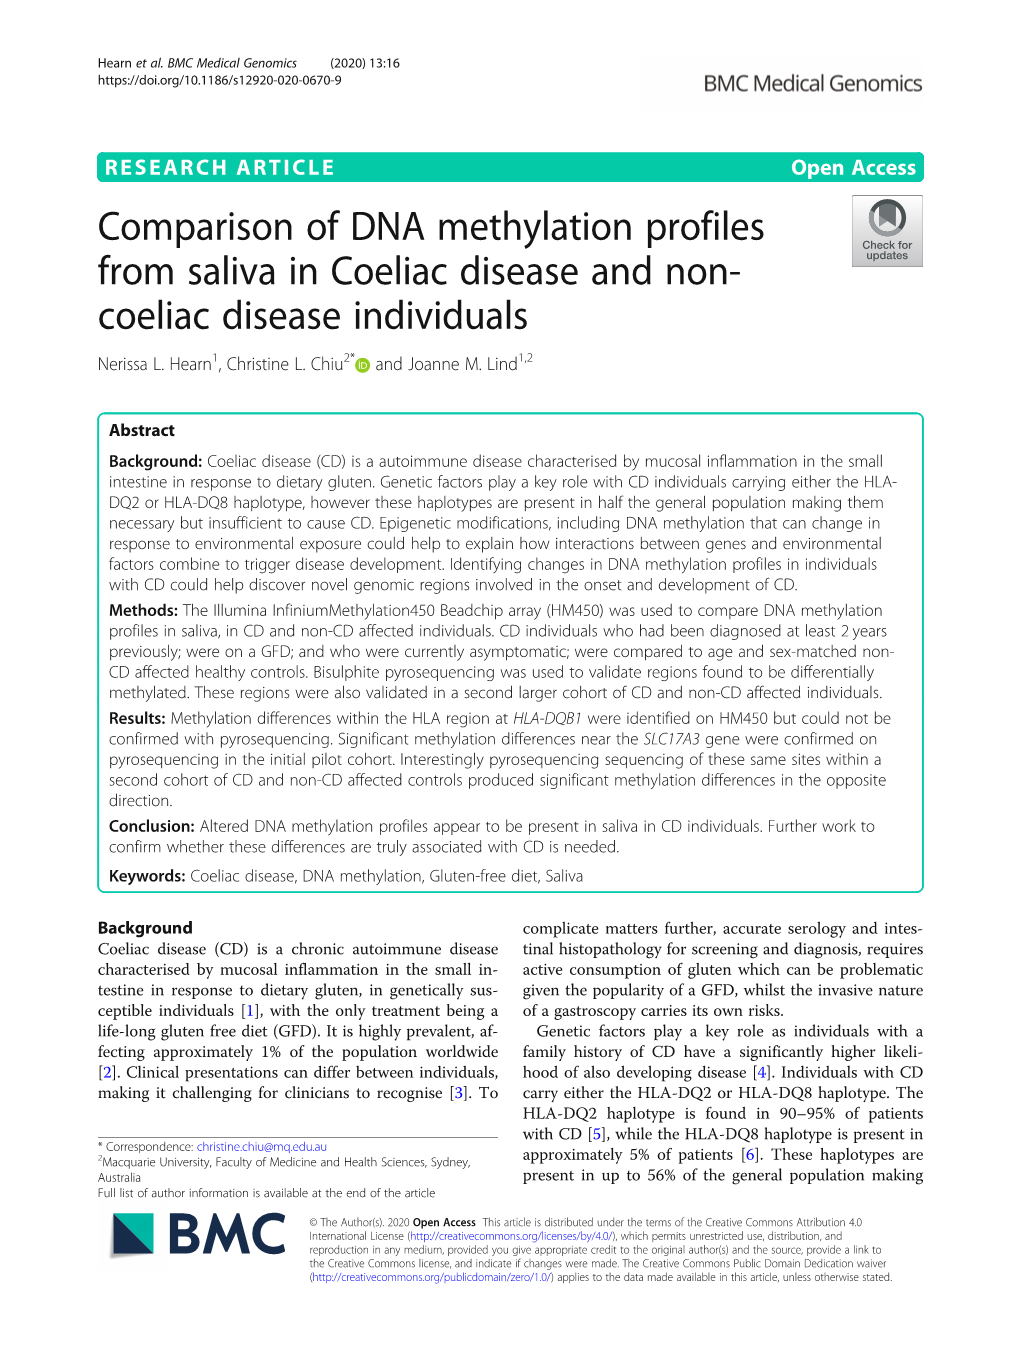 Comparison of DNA Methylation Profiles from Saliva in Coeliac Disease and Non- Coeliac Disease Individuals Nerissa L